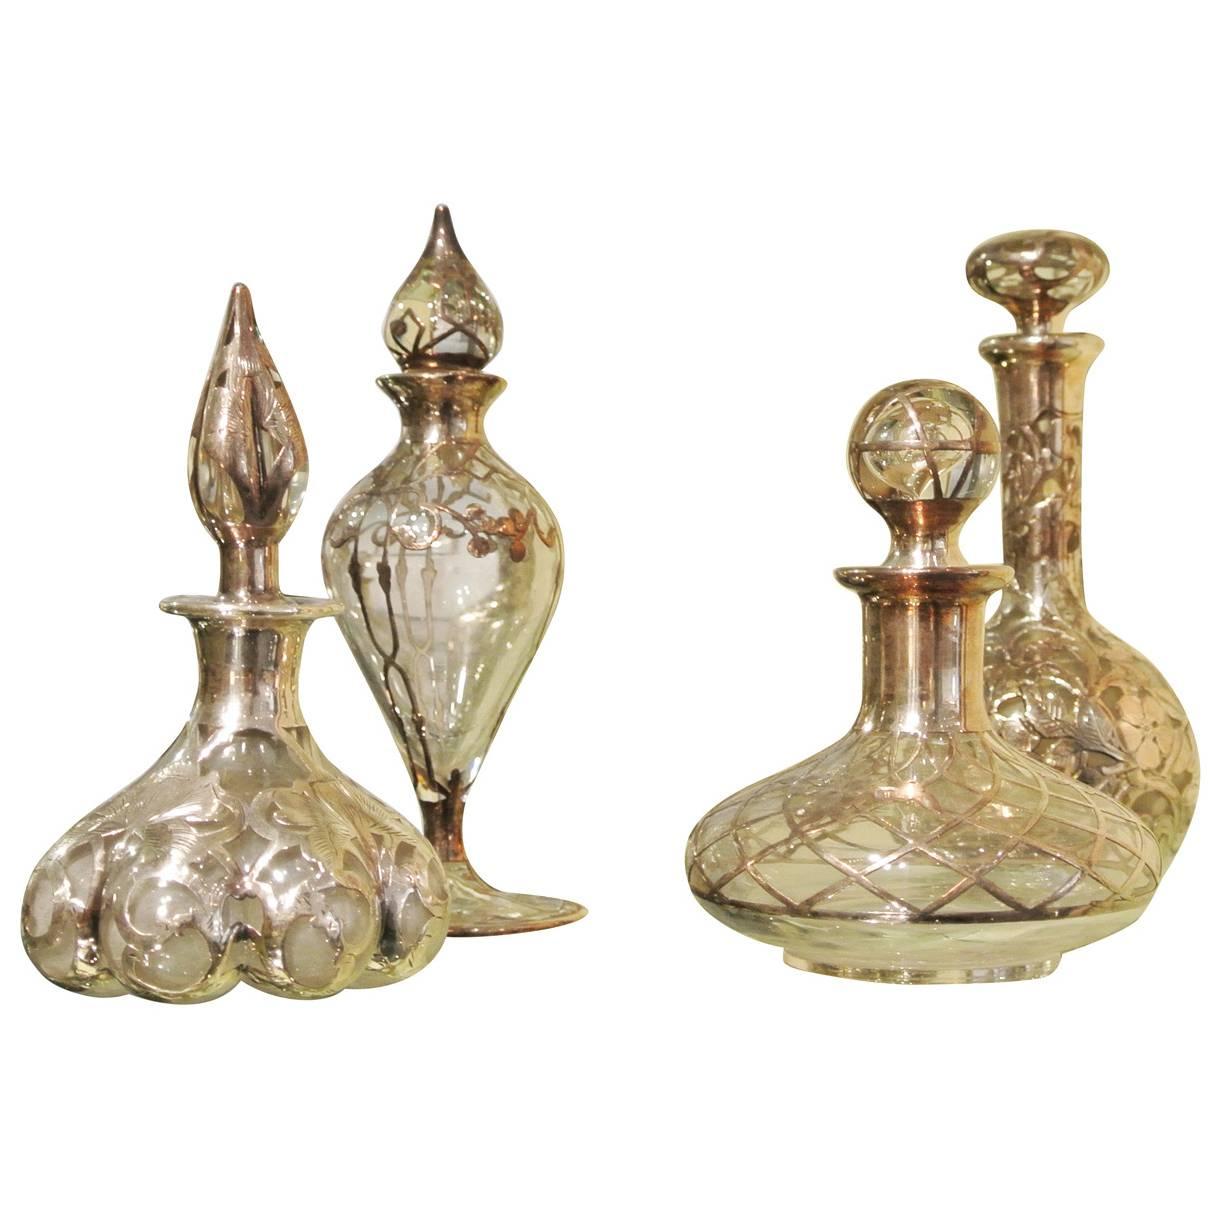 Sterling and Glass Perfume Bottles